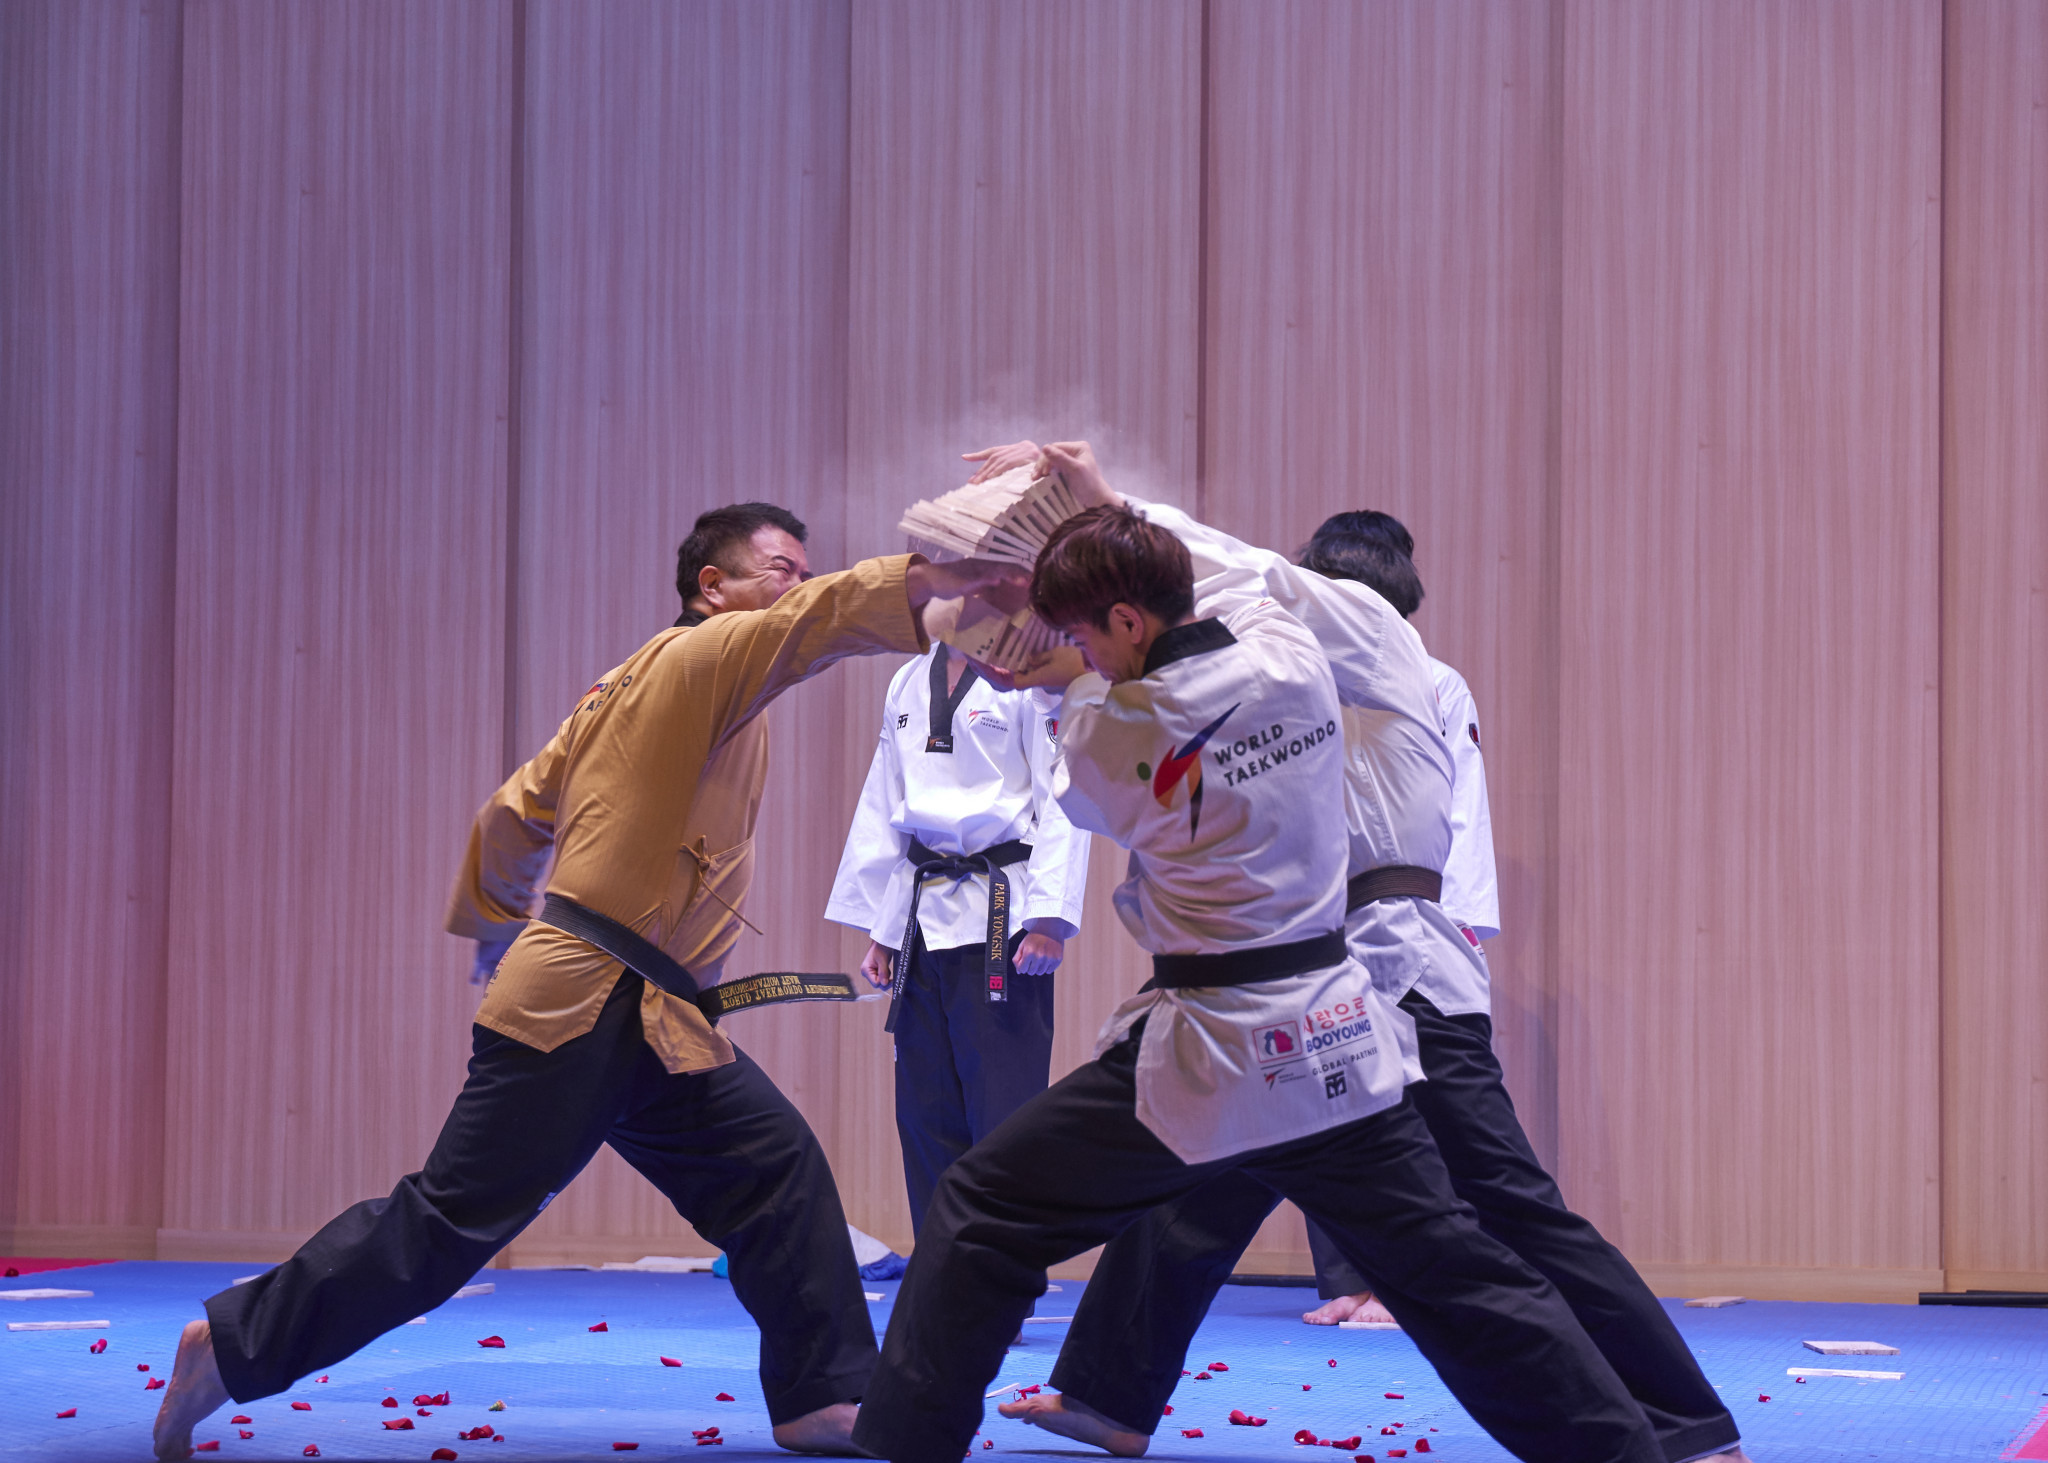 Punching and kicking planks of wood formed a key part of the demonstration ©World Taekwondo